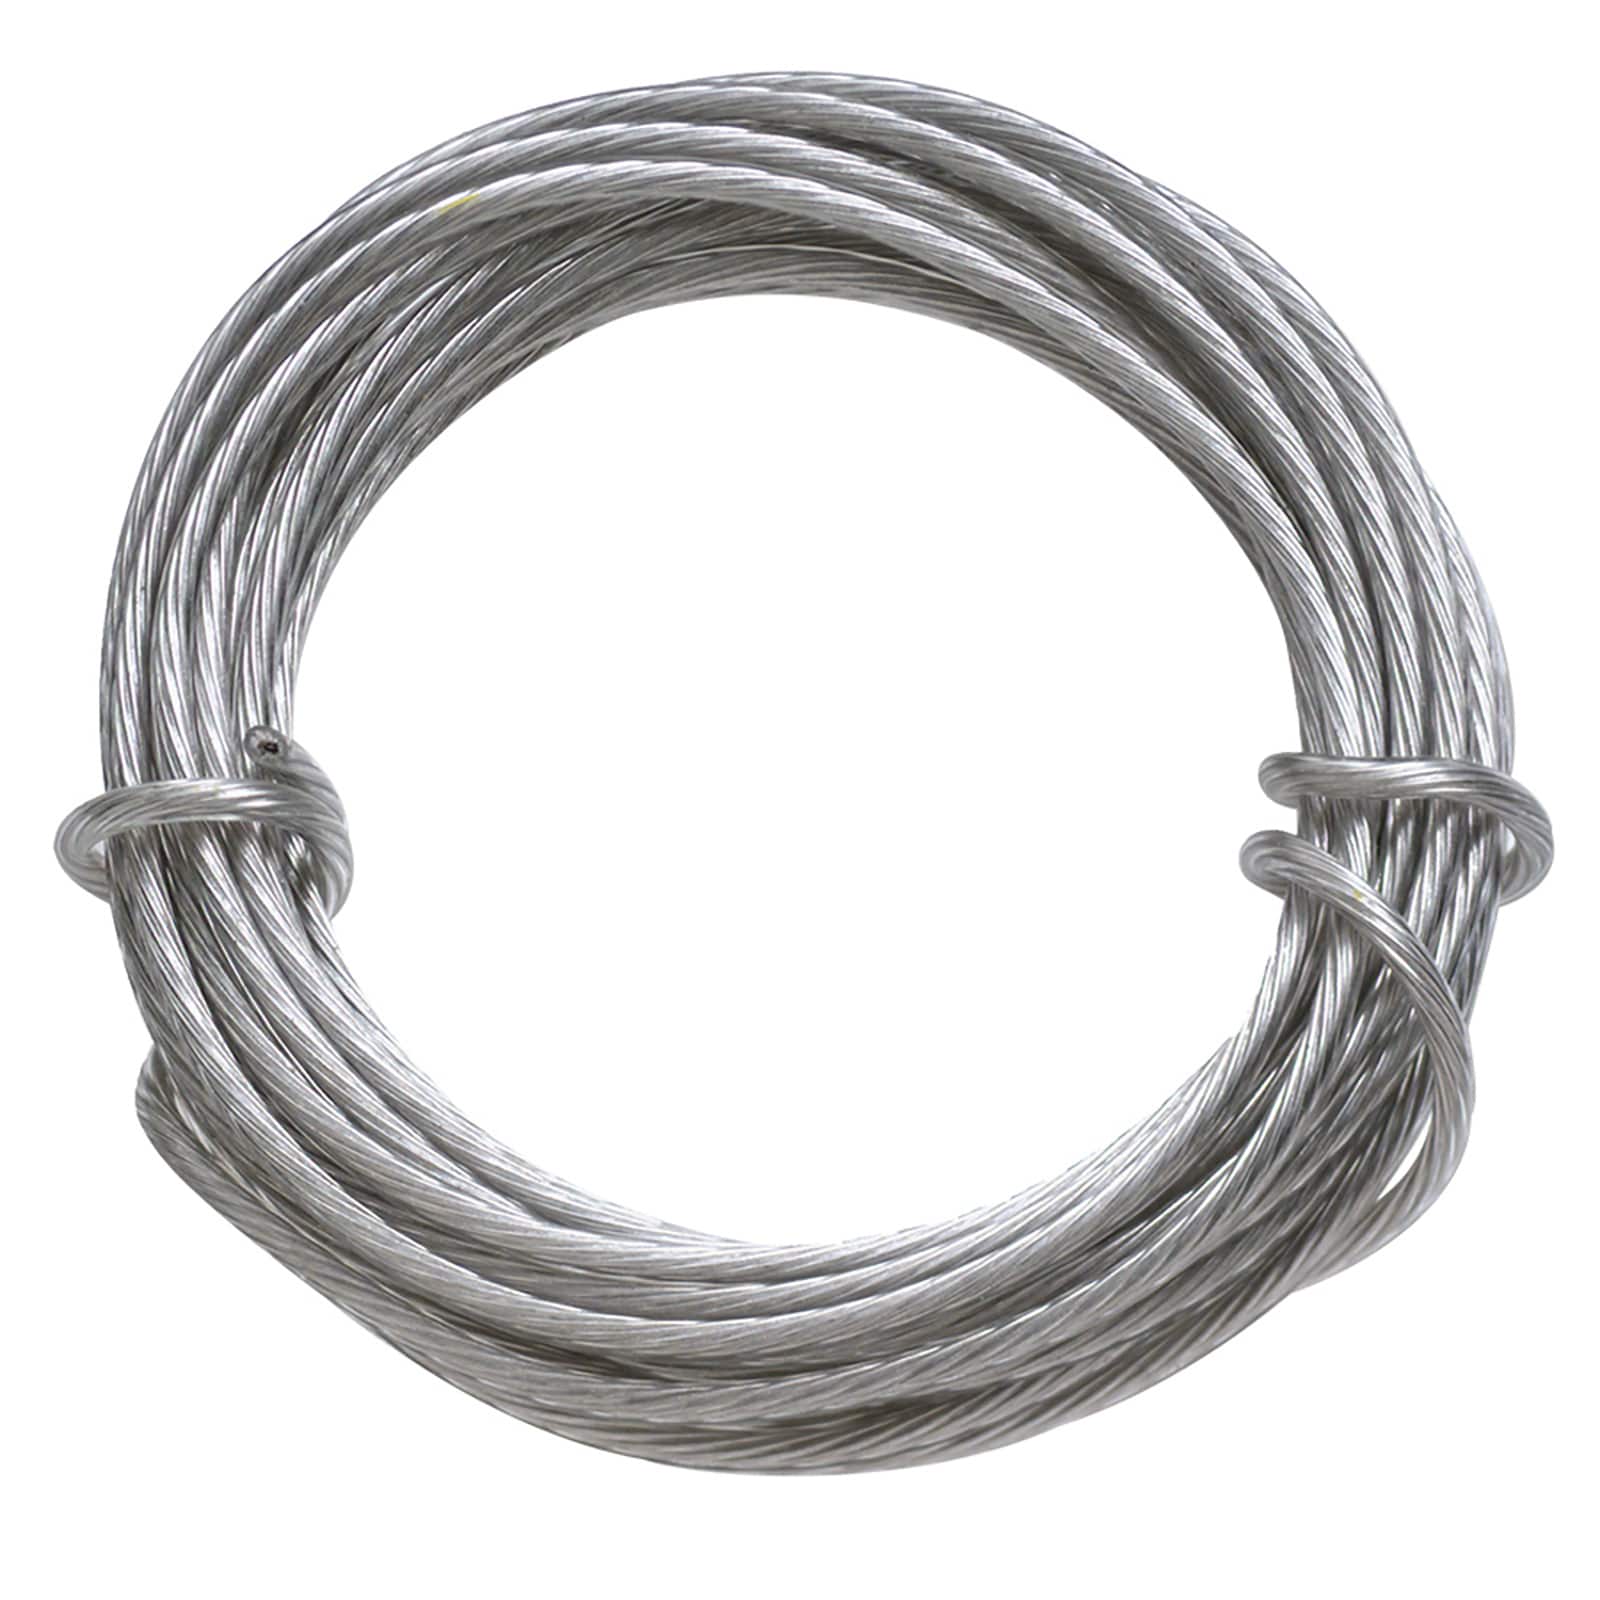 HangZ&#x2122; 20lb. Coated Stainless Steel Gallery Wire, 9ft.